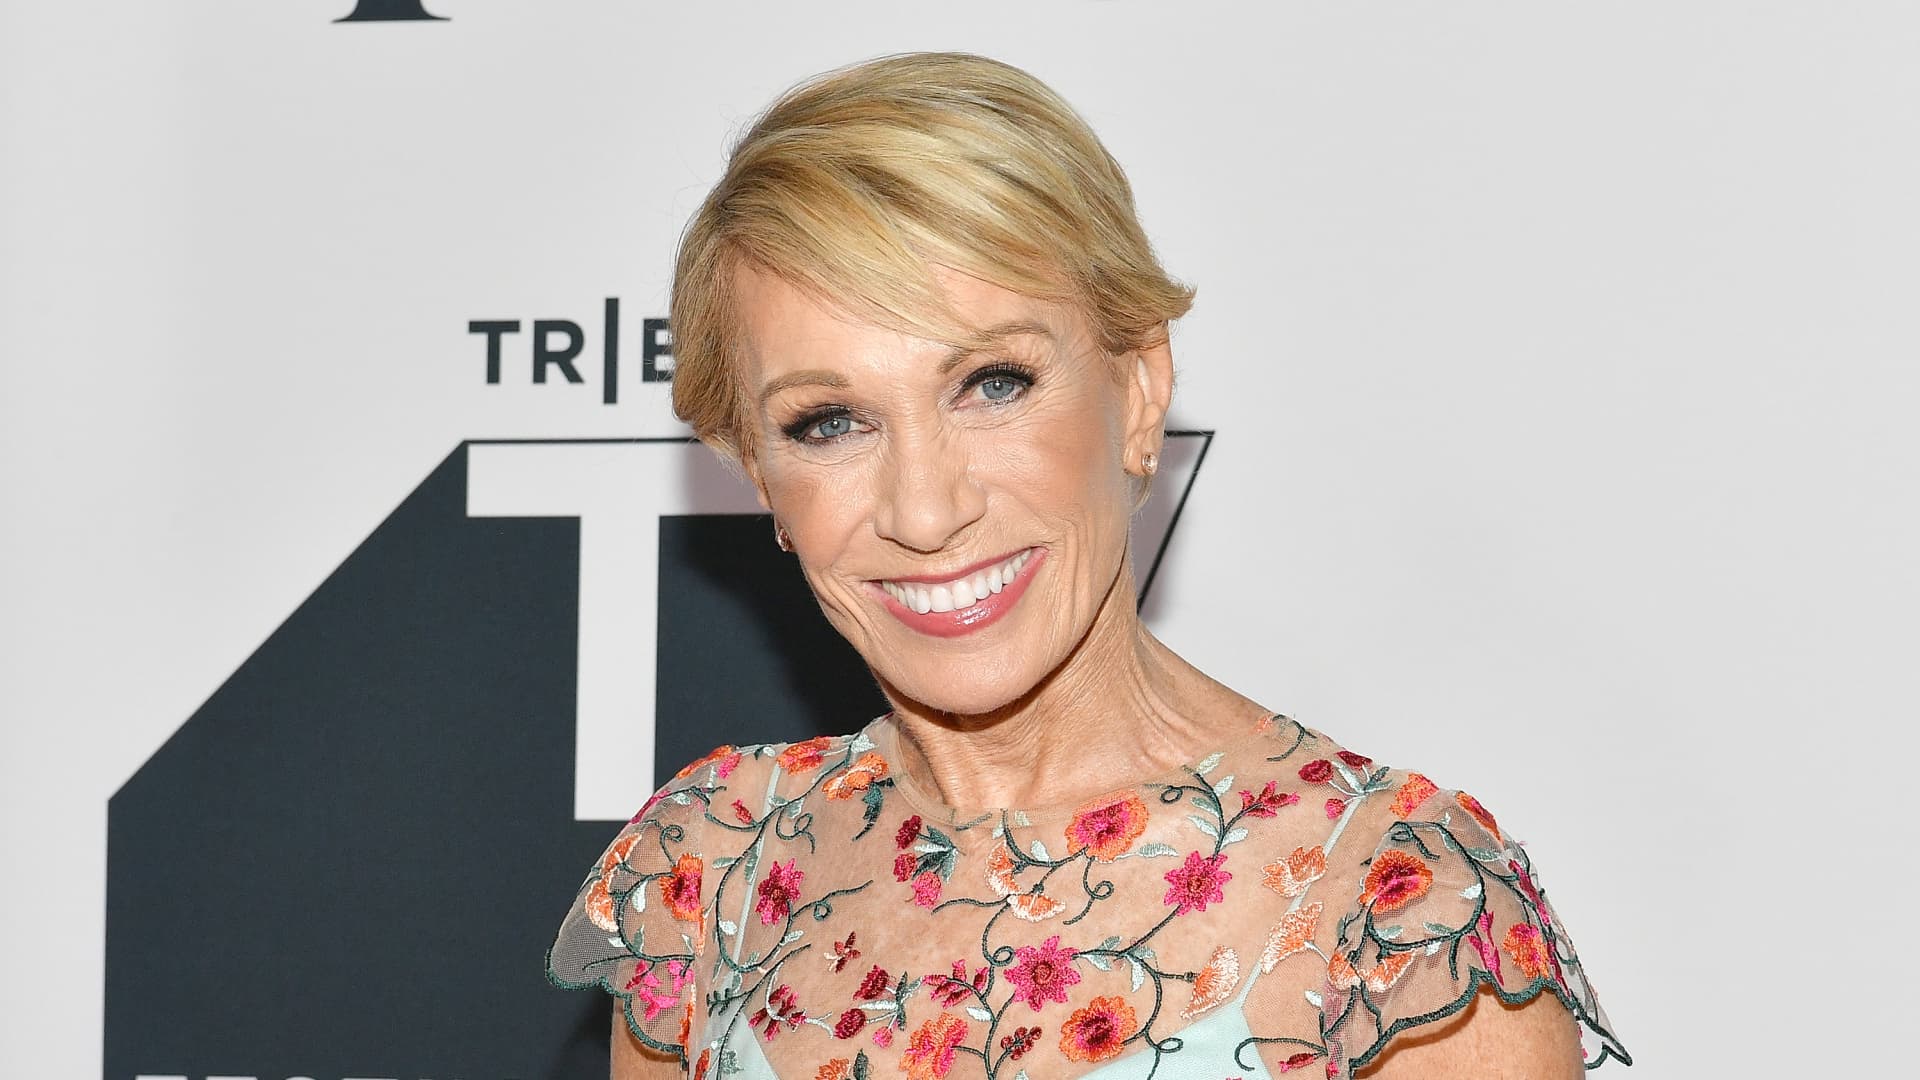 'Shark Tank' star Barbara Corcoran’s No. 1 piece of investing advice: Don't diversify, ‘money is meant to be spent’